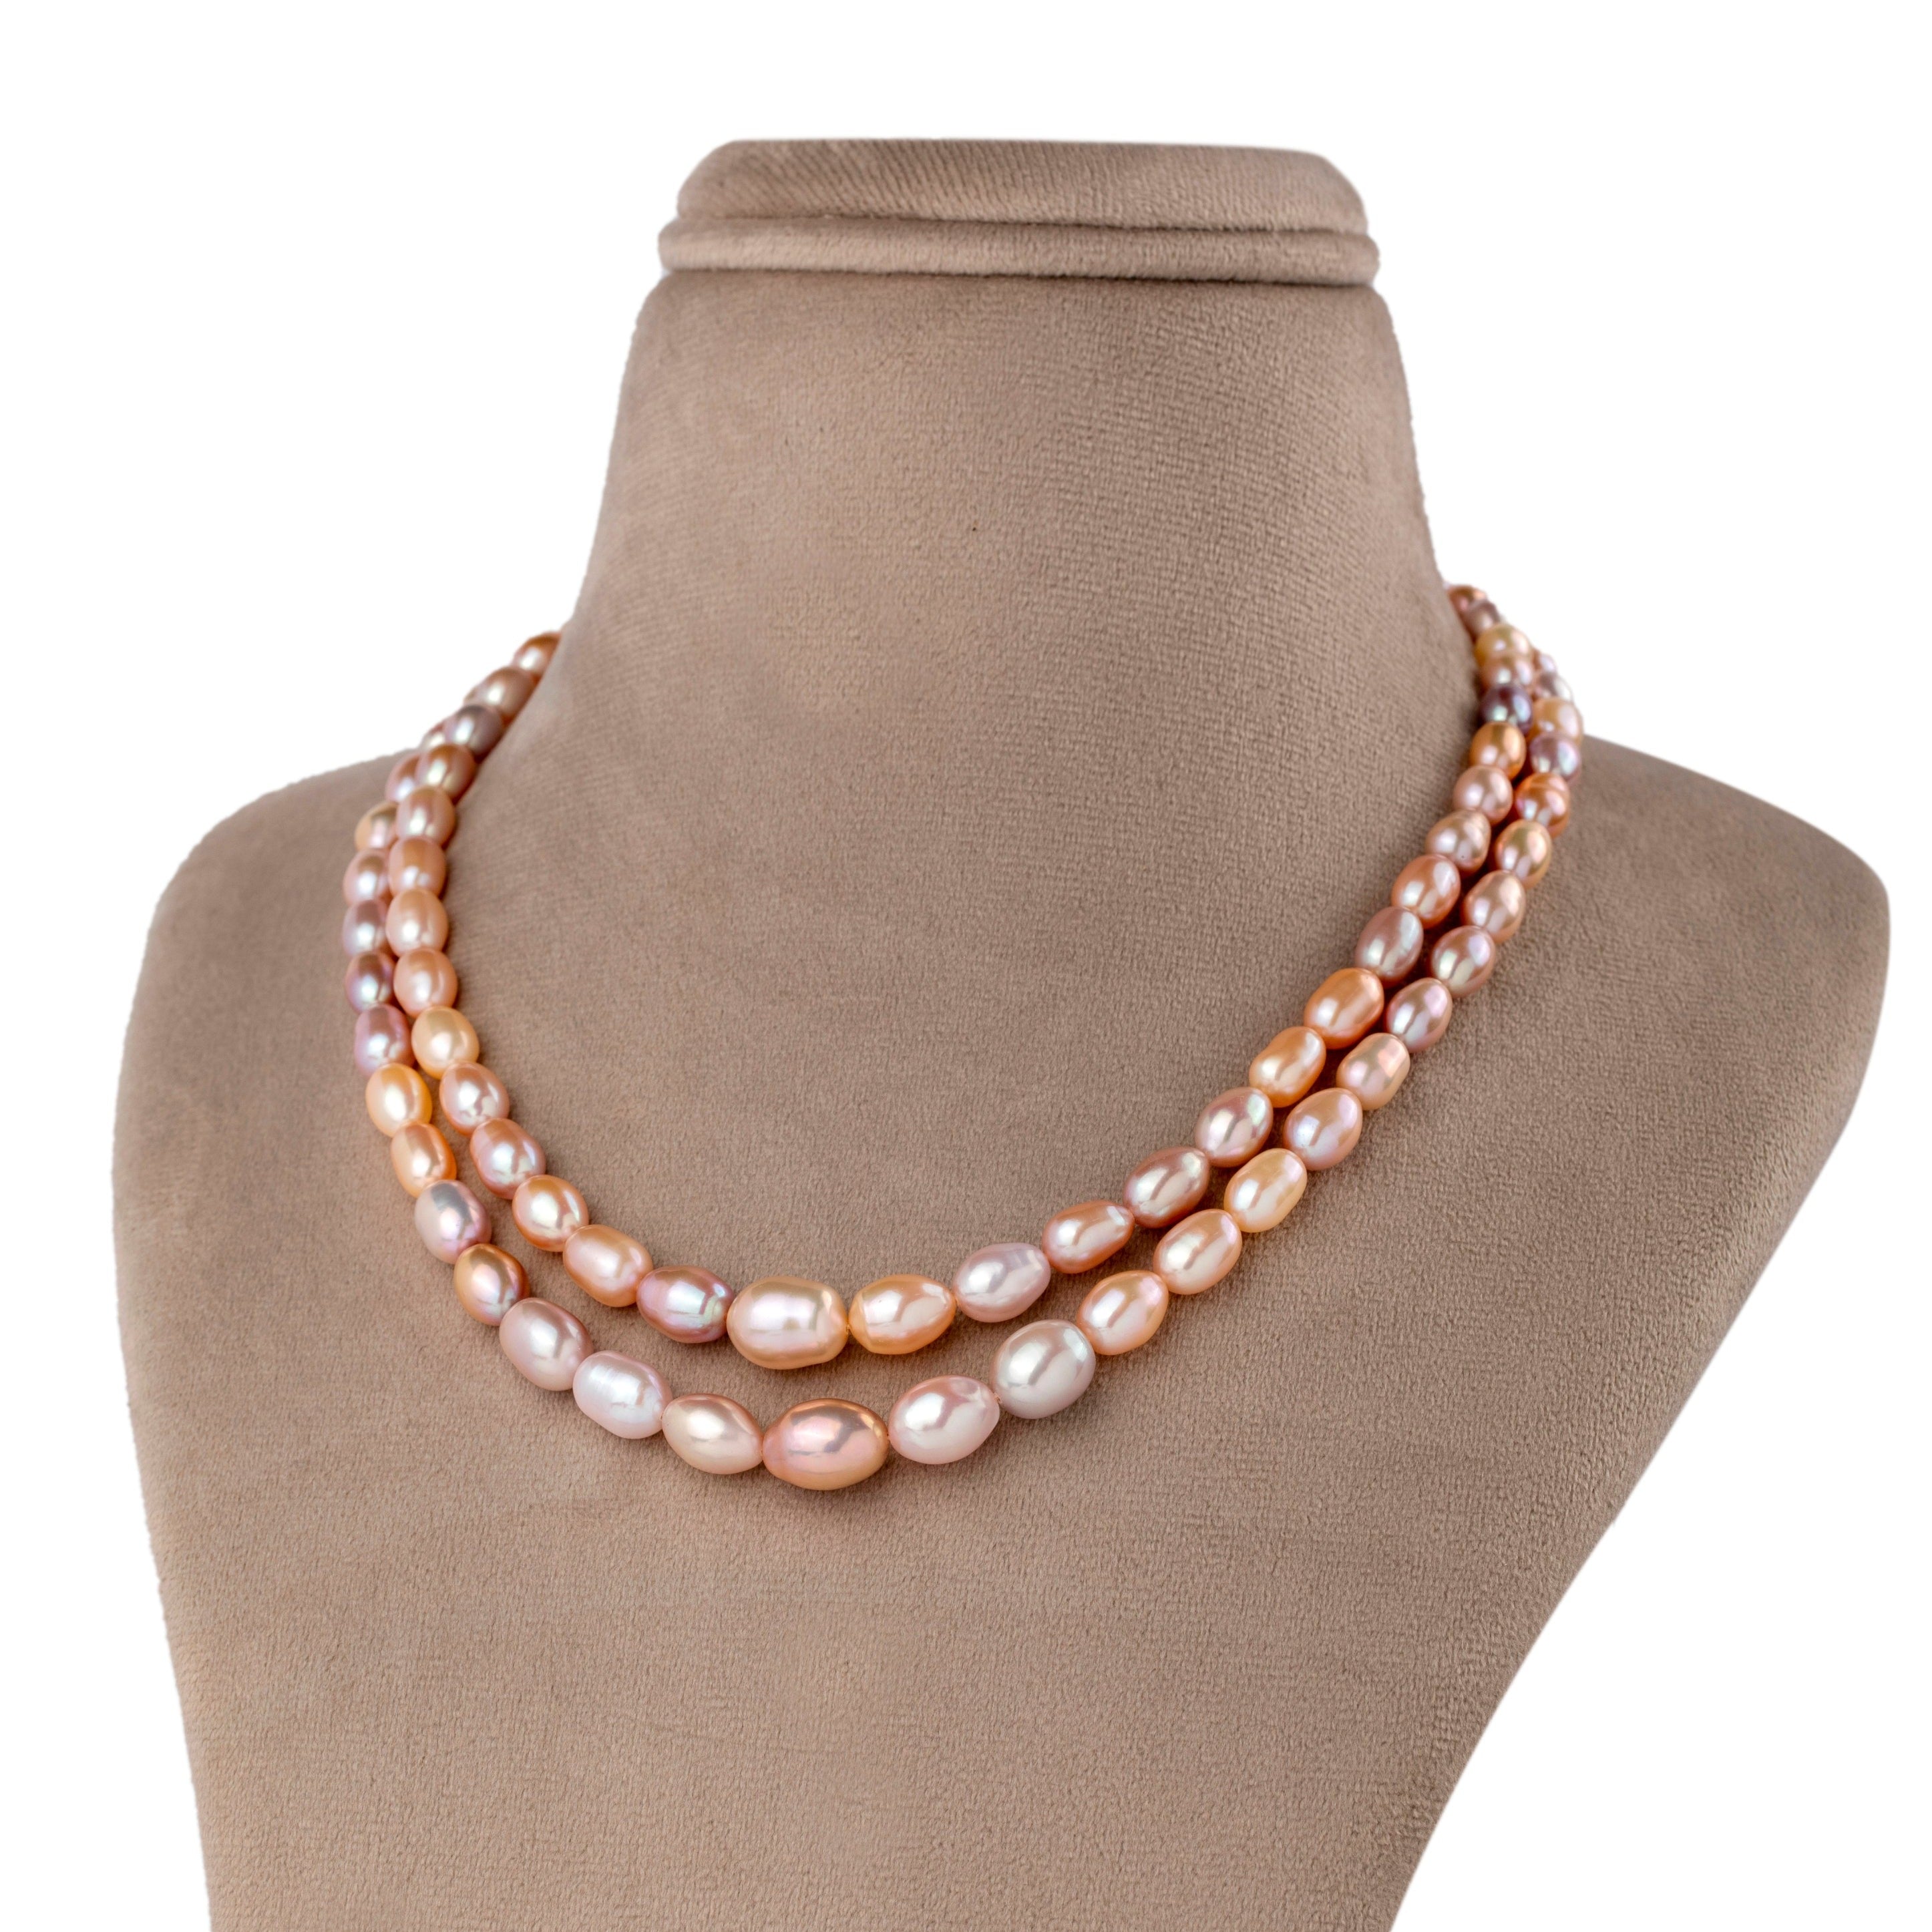 Soft Peach Freshwater Pearl Necklace